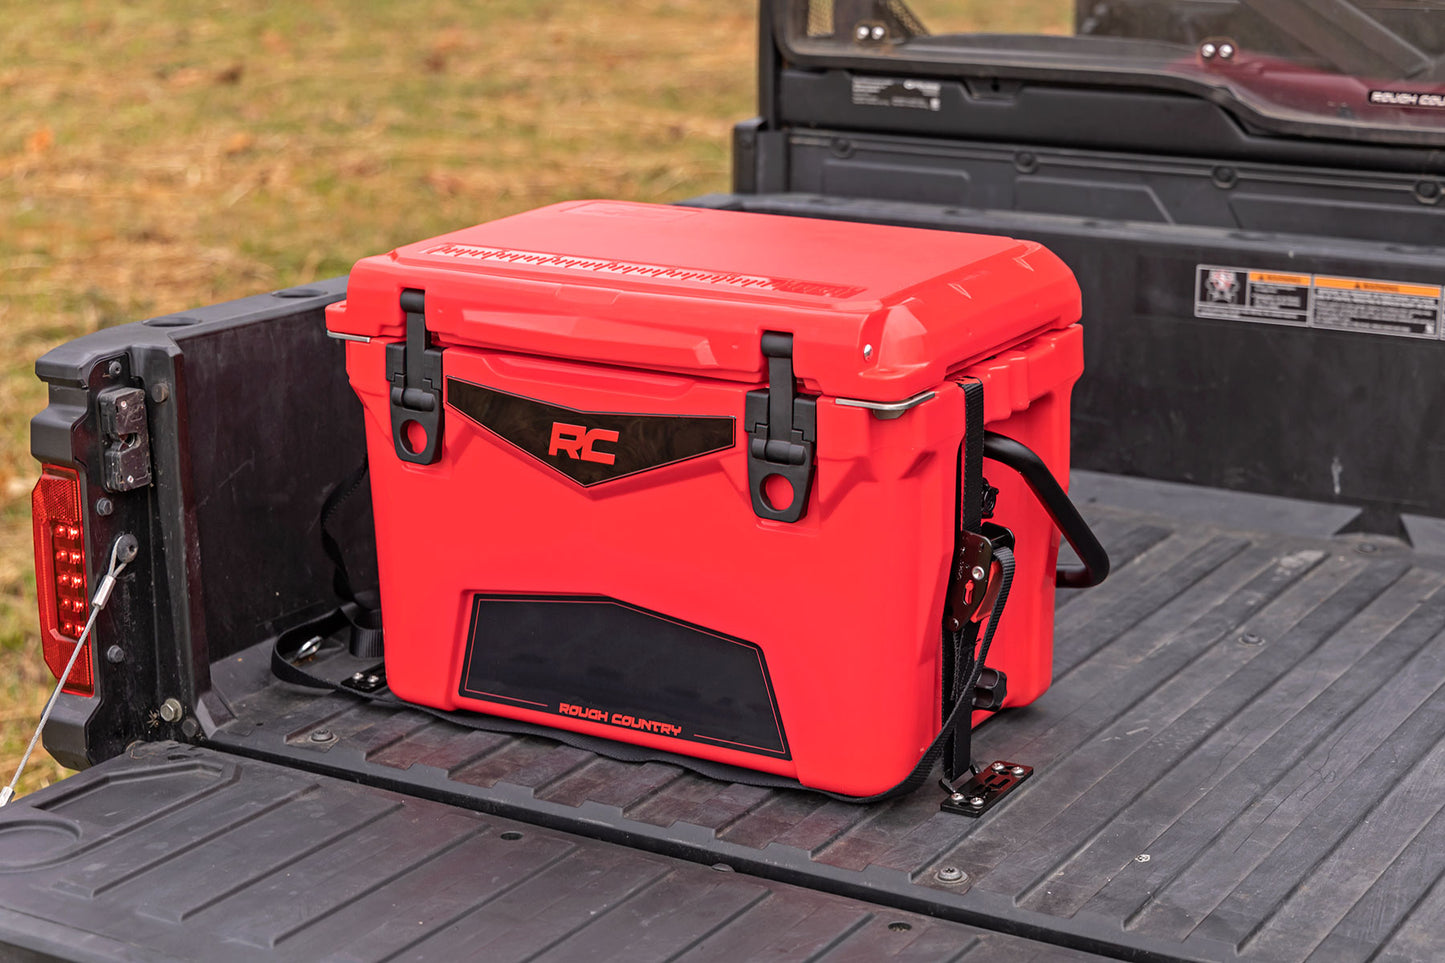 Rough Country 20 Qt Compact Cooler